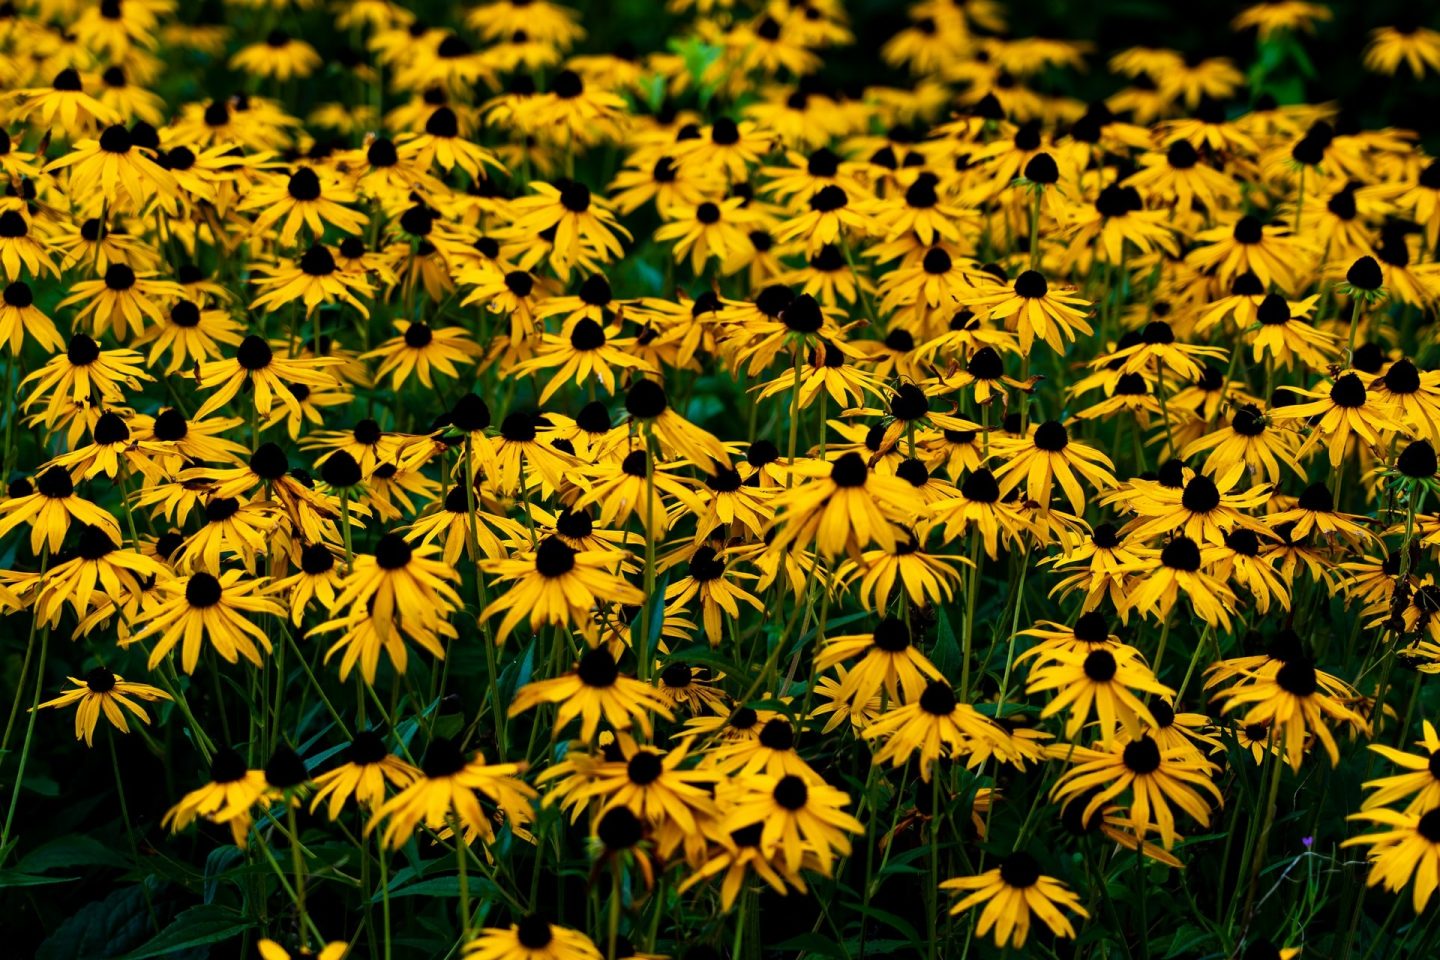 A field of bright yellow rudbeckia flowers